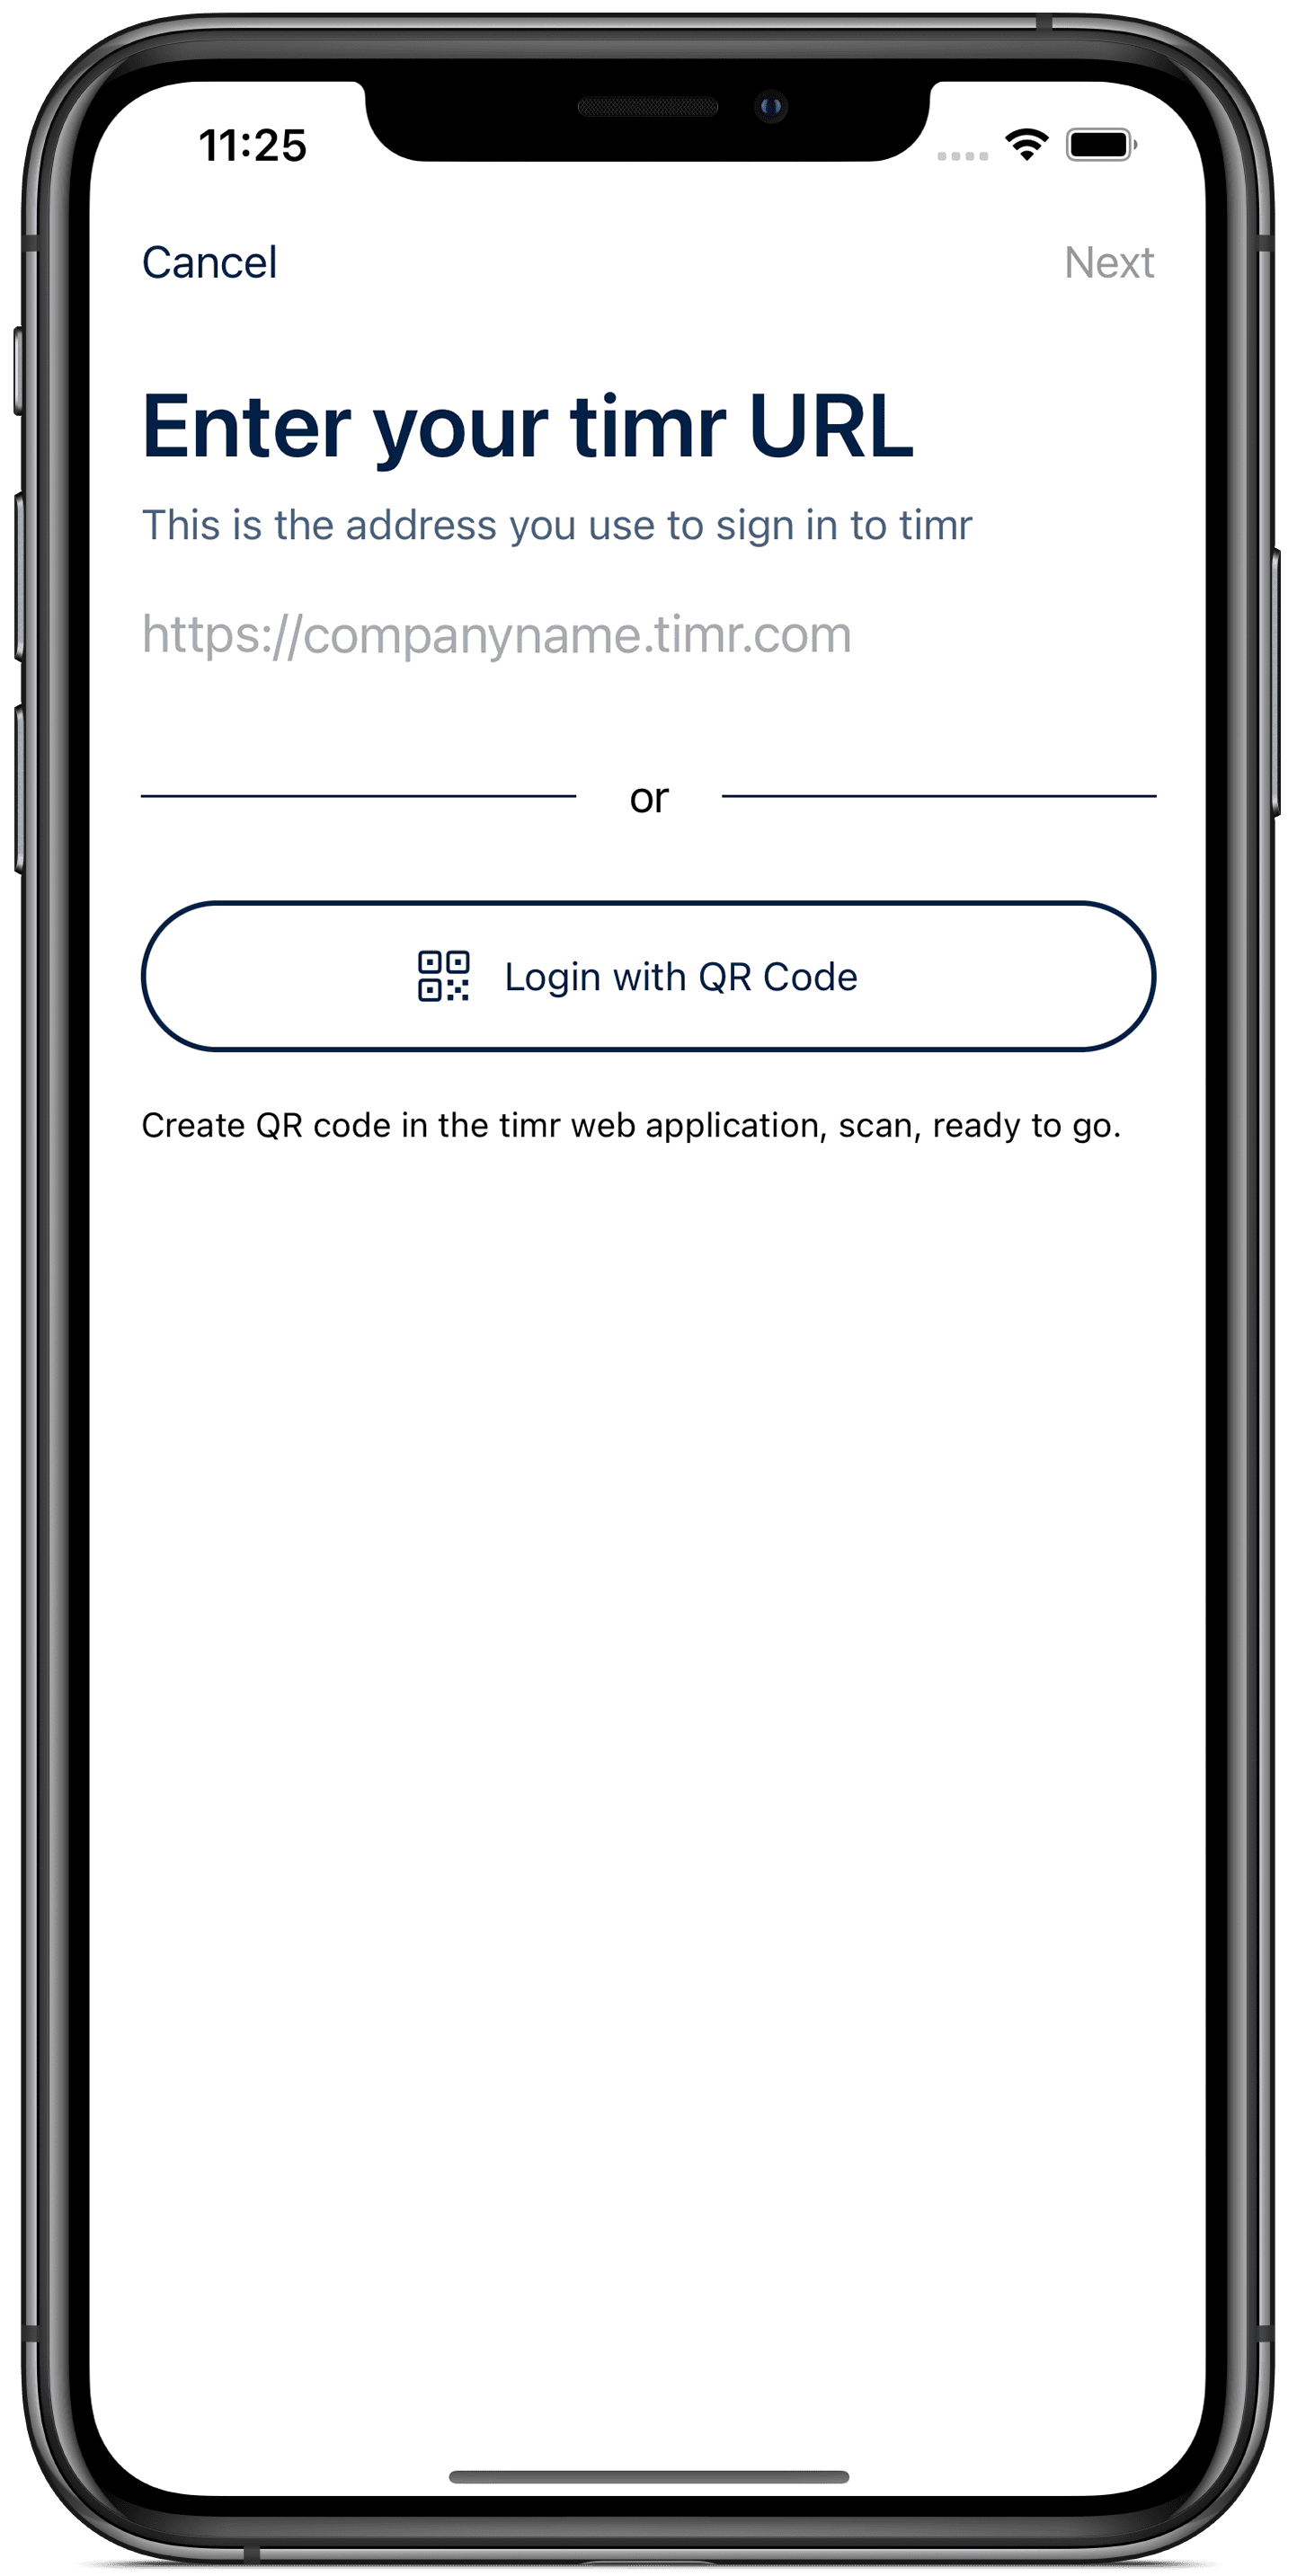 Login with qr code